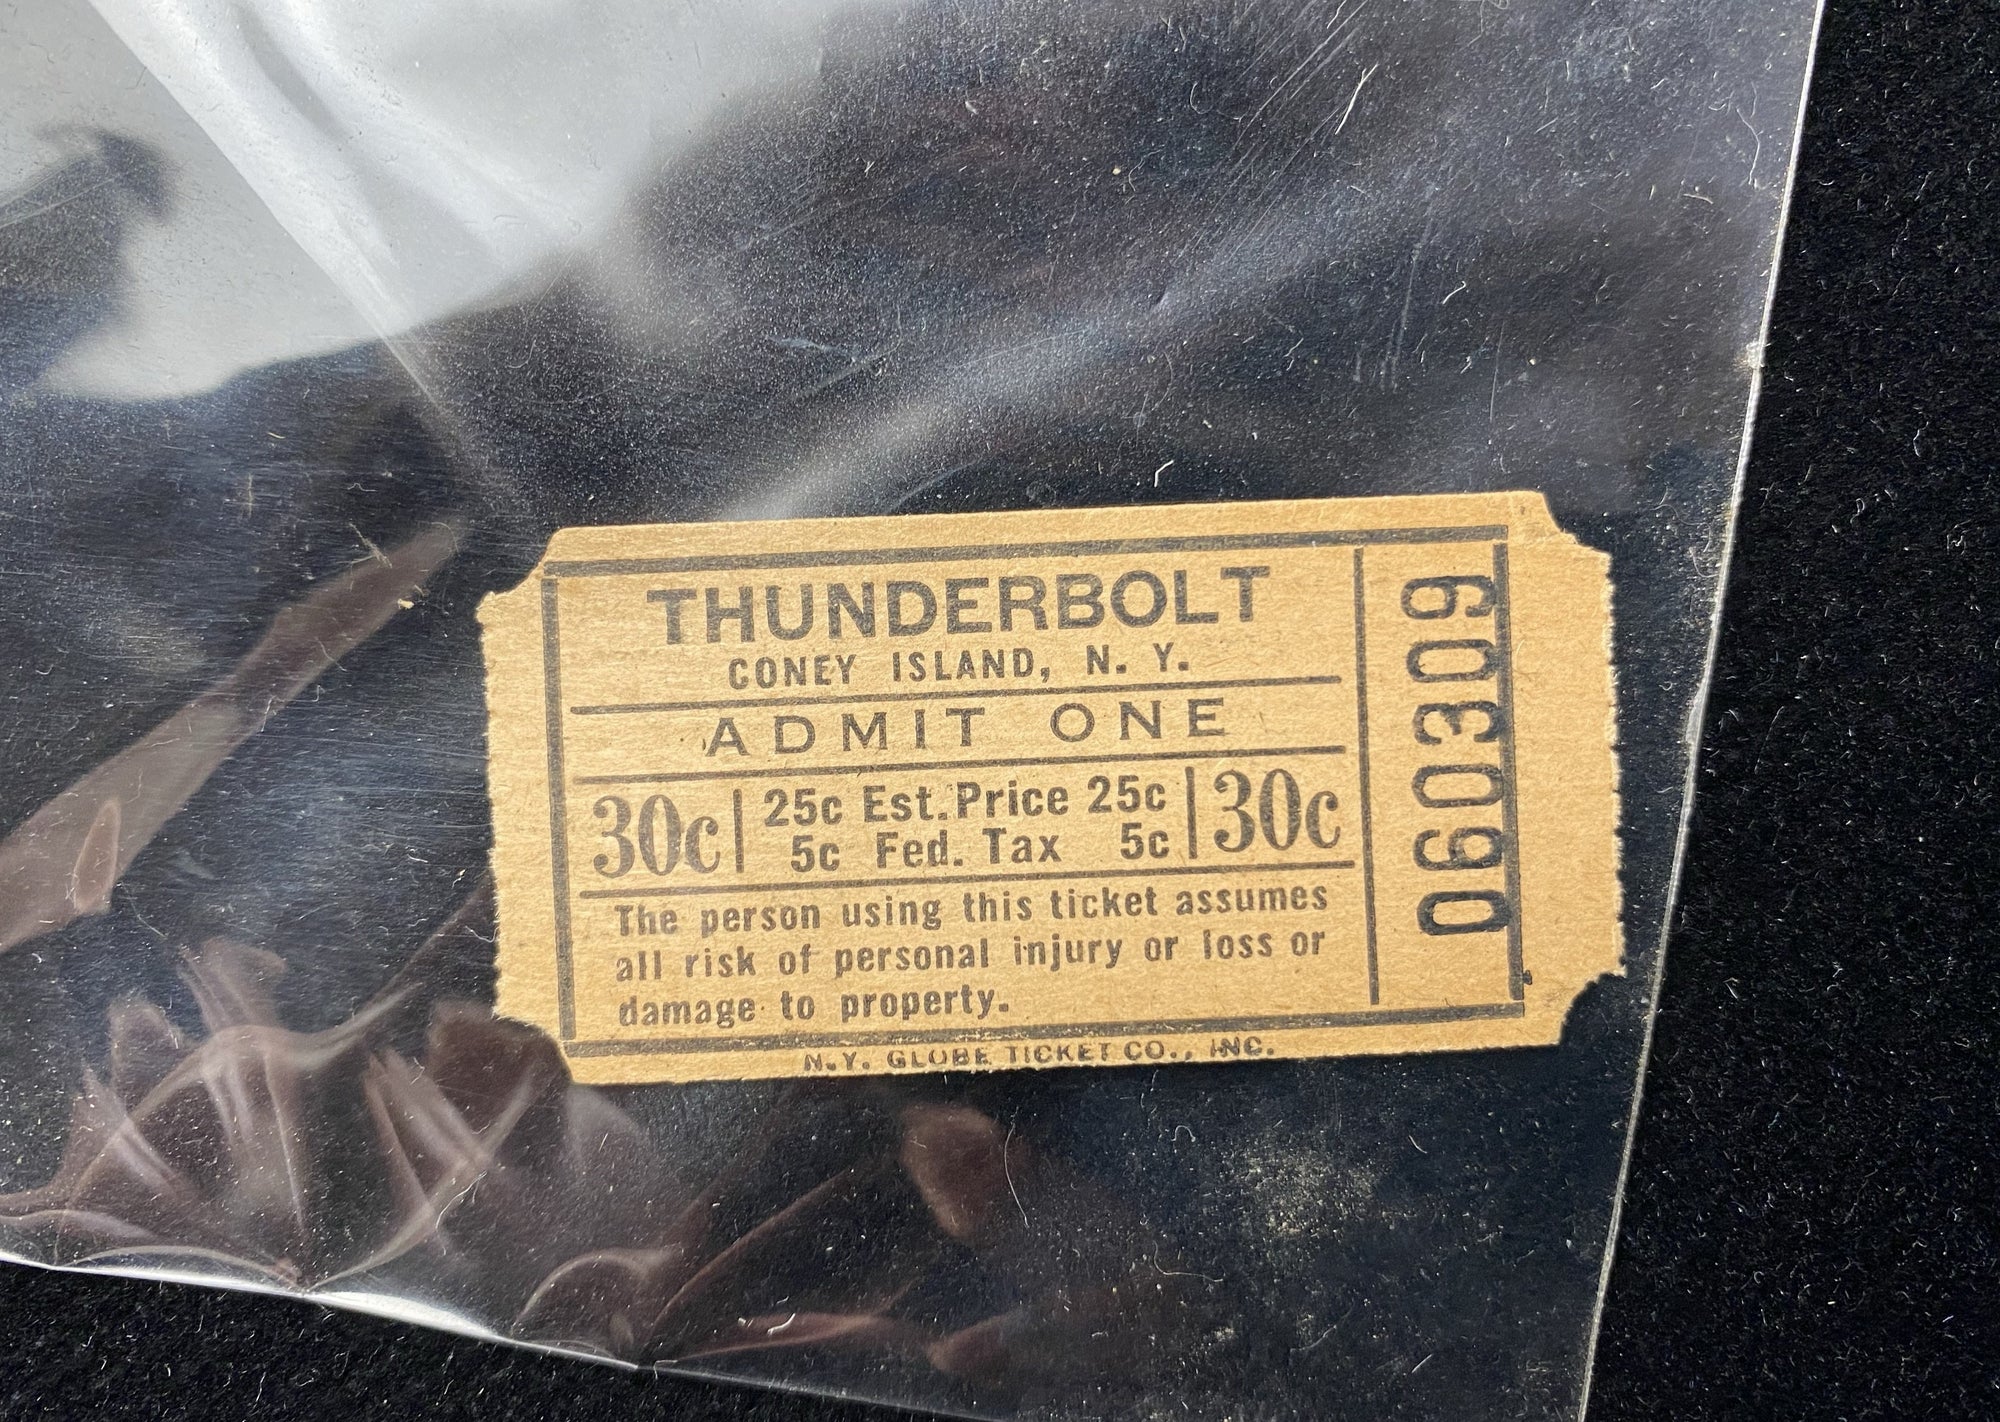 original and unused pasteboard ticket for the Thunderbolt ride, Coney Island, circa 1940. Mint condition